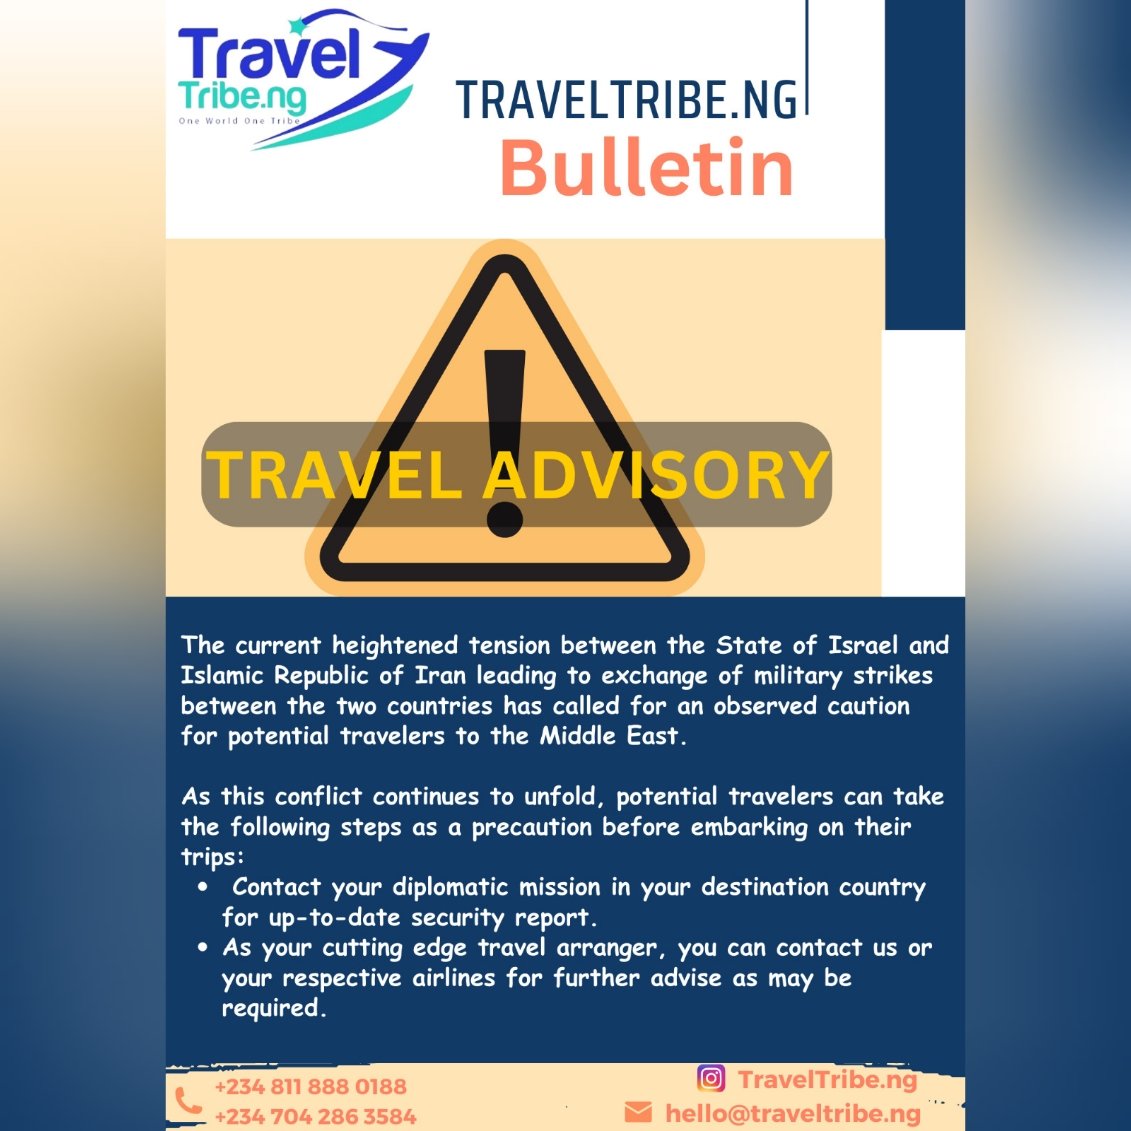 Travel Advisory for prospective travelers to the Middle East...
.
.
.
#MiddleEast #MiddleEastConflict #TravelAdvisory #TravelTribeNG #flights #visas #tours #corporatetravels #airporttransfers #airportprotocols #hotels